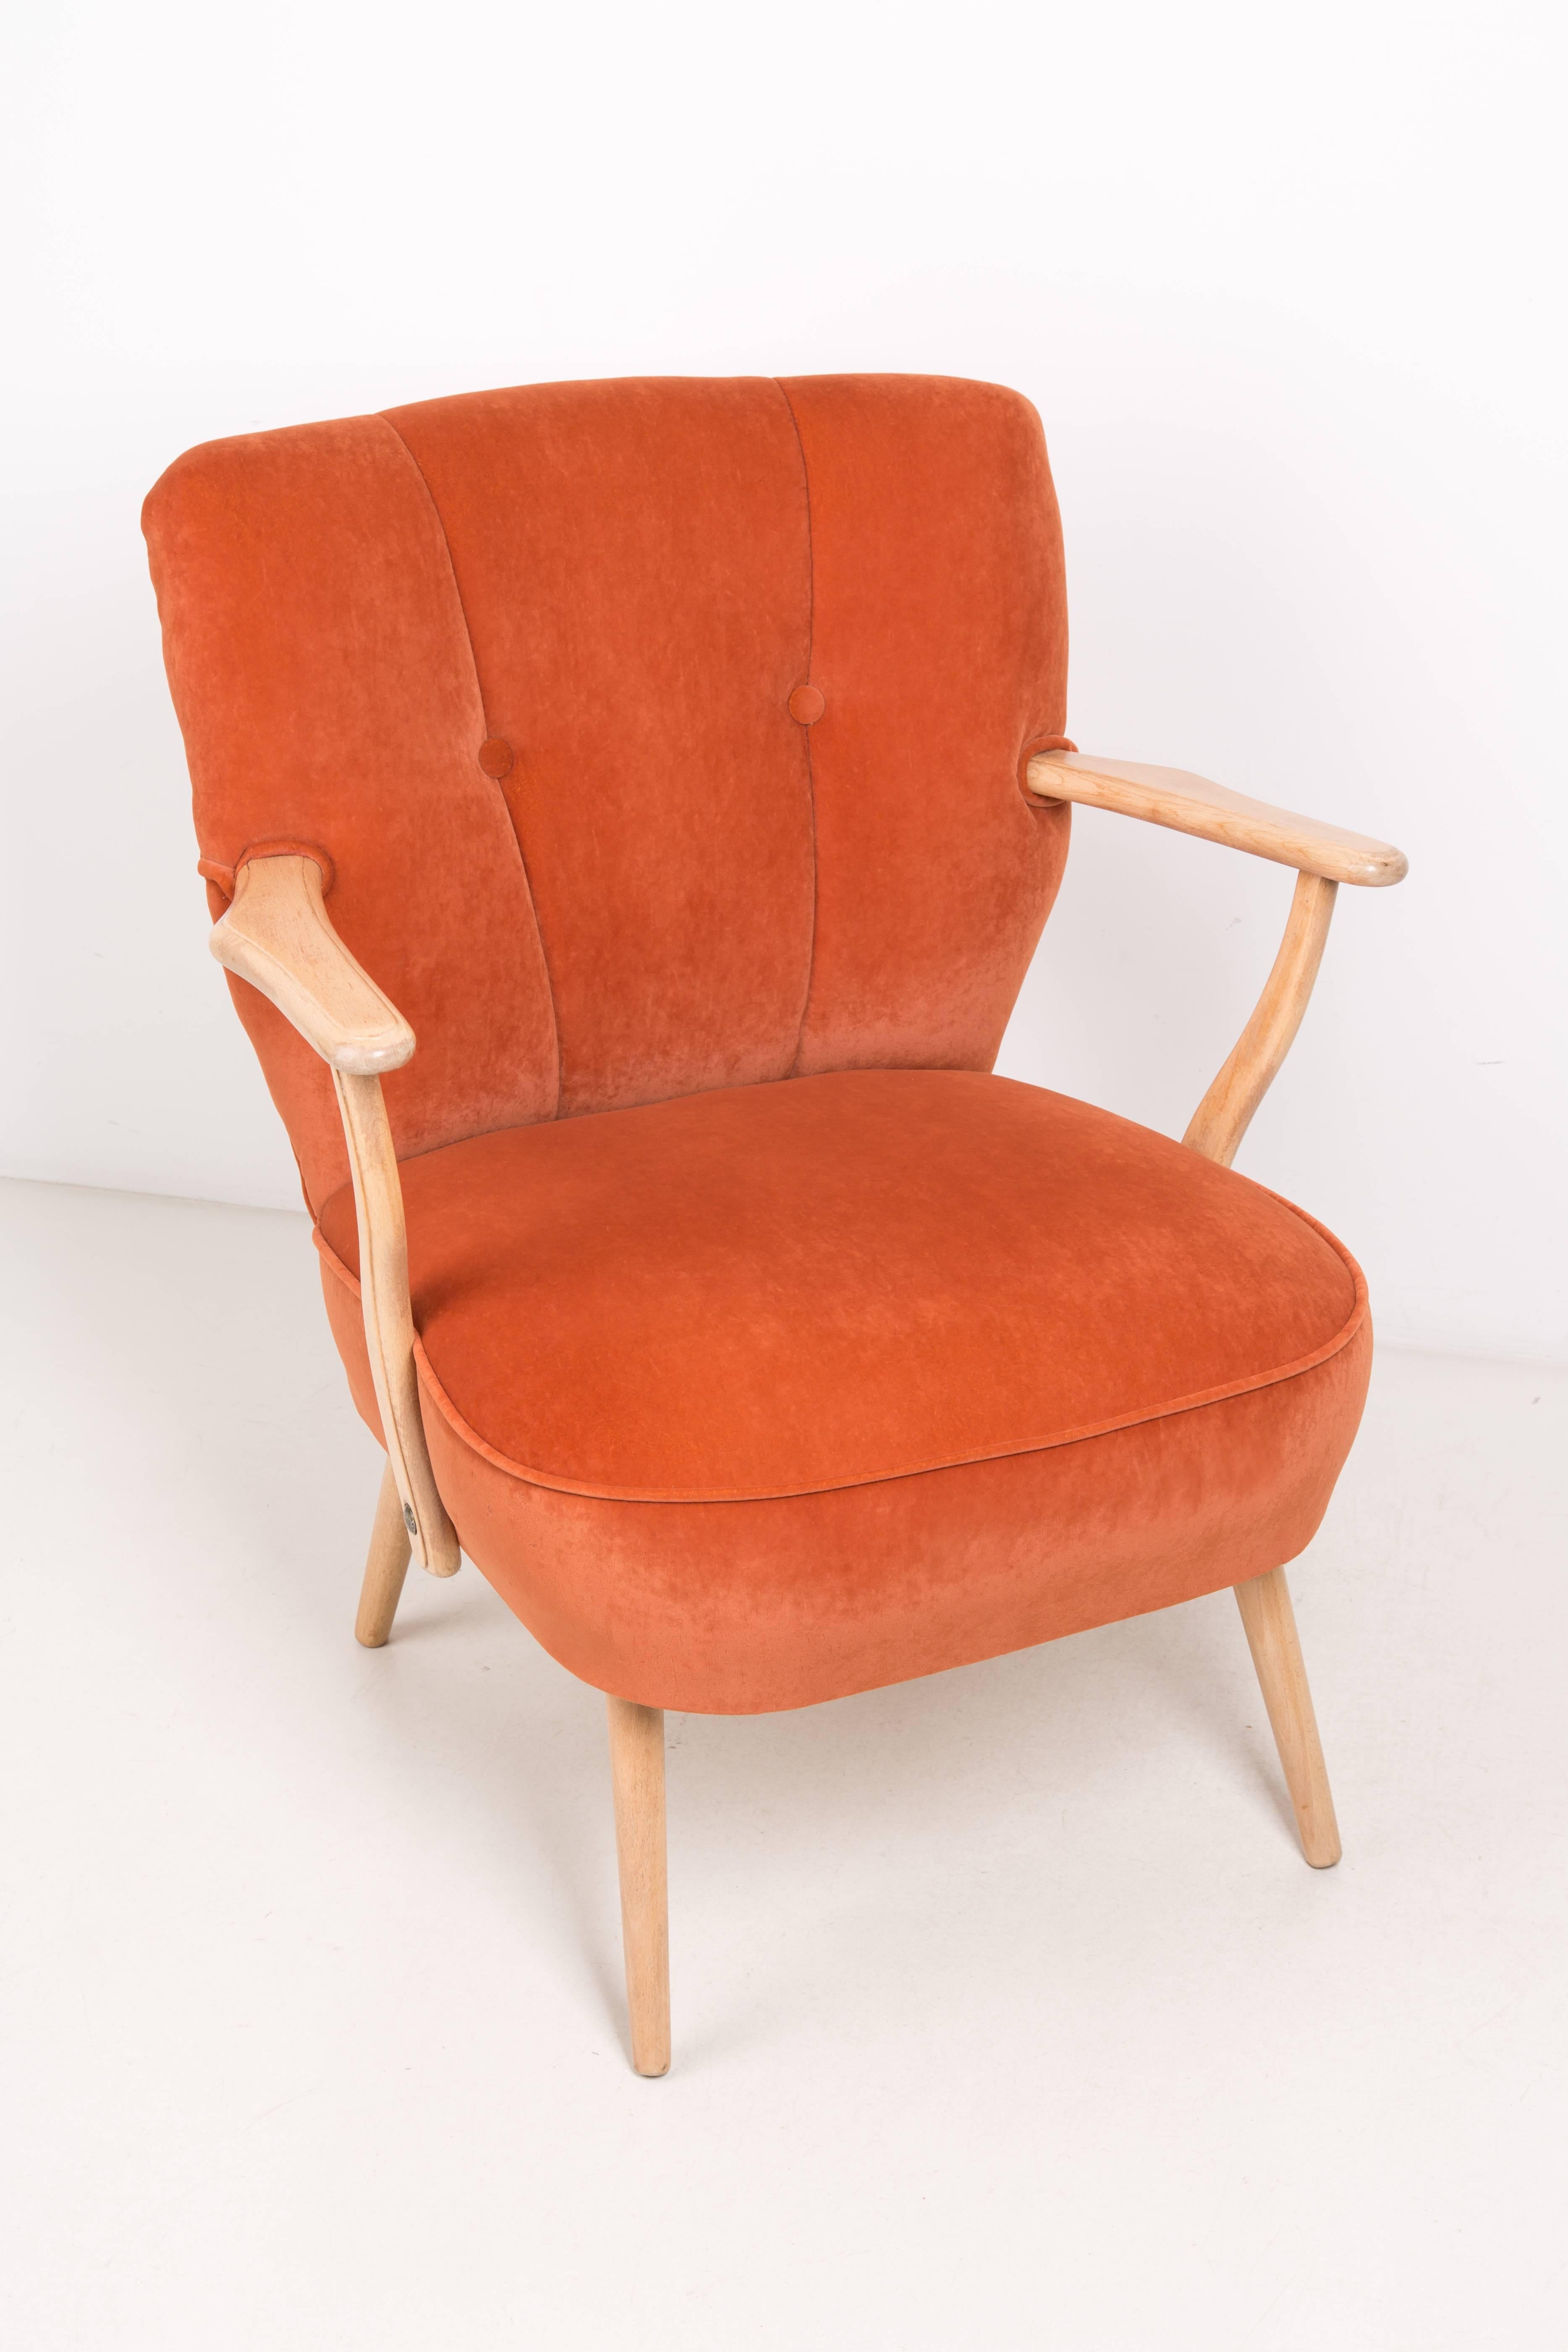 Mid-Century Modern Pair of Midcentury Orange Cocktail Armchairs, Germany, 1960s For Sale